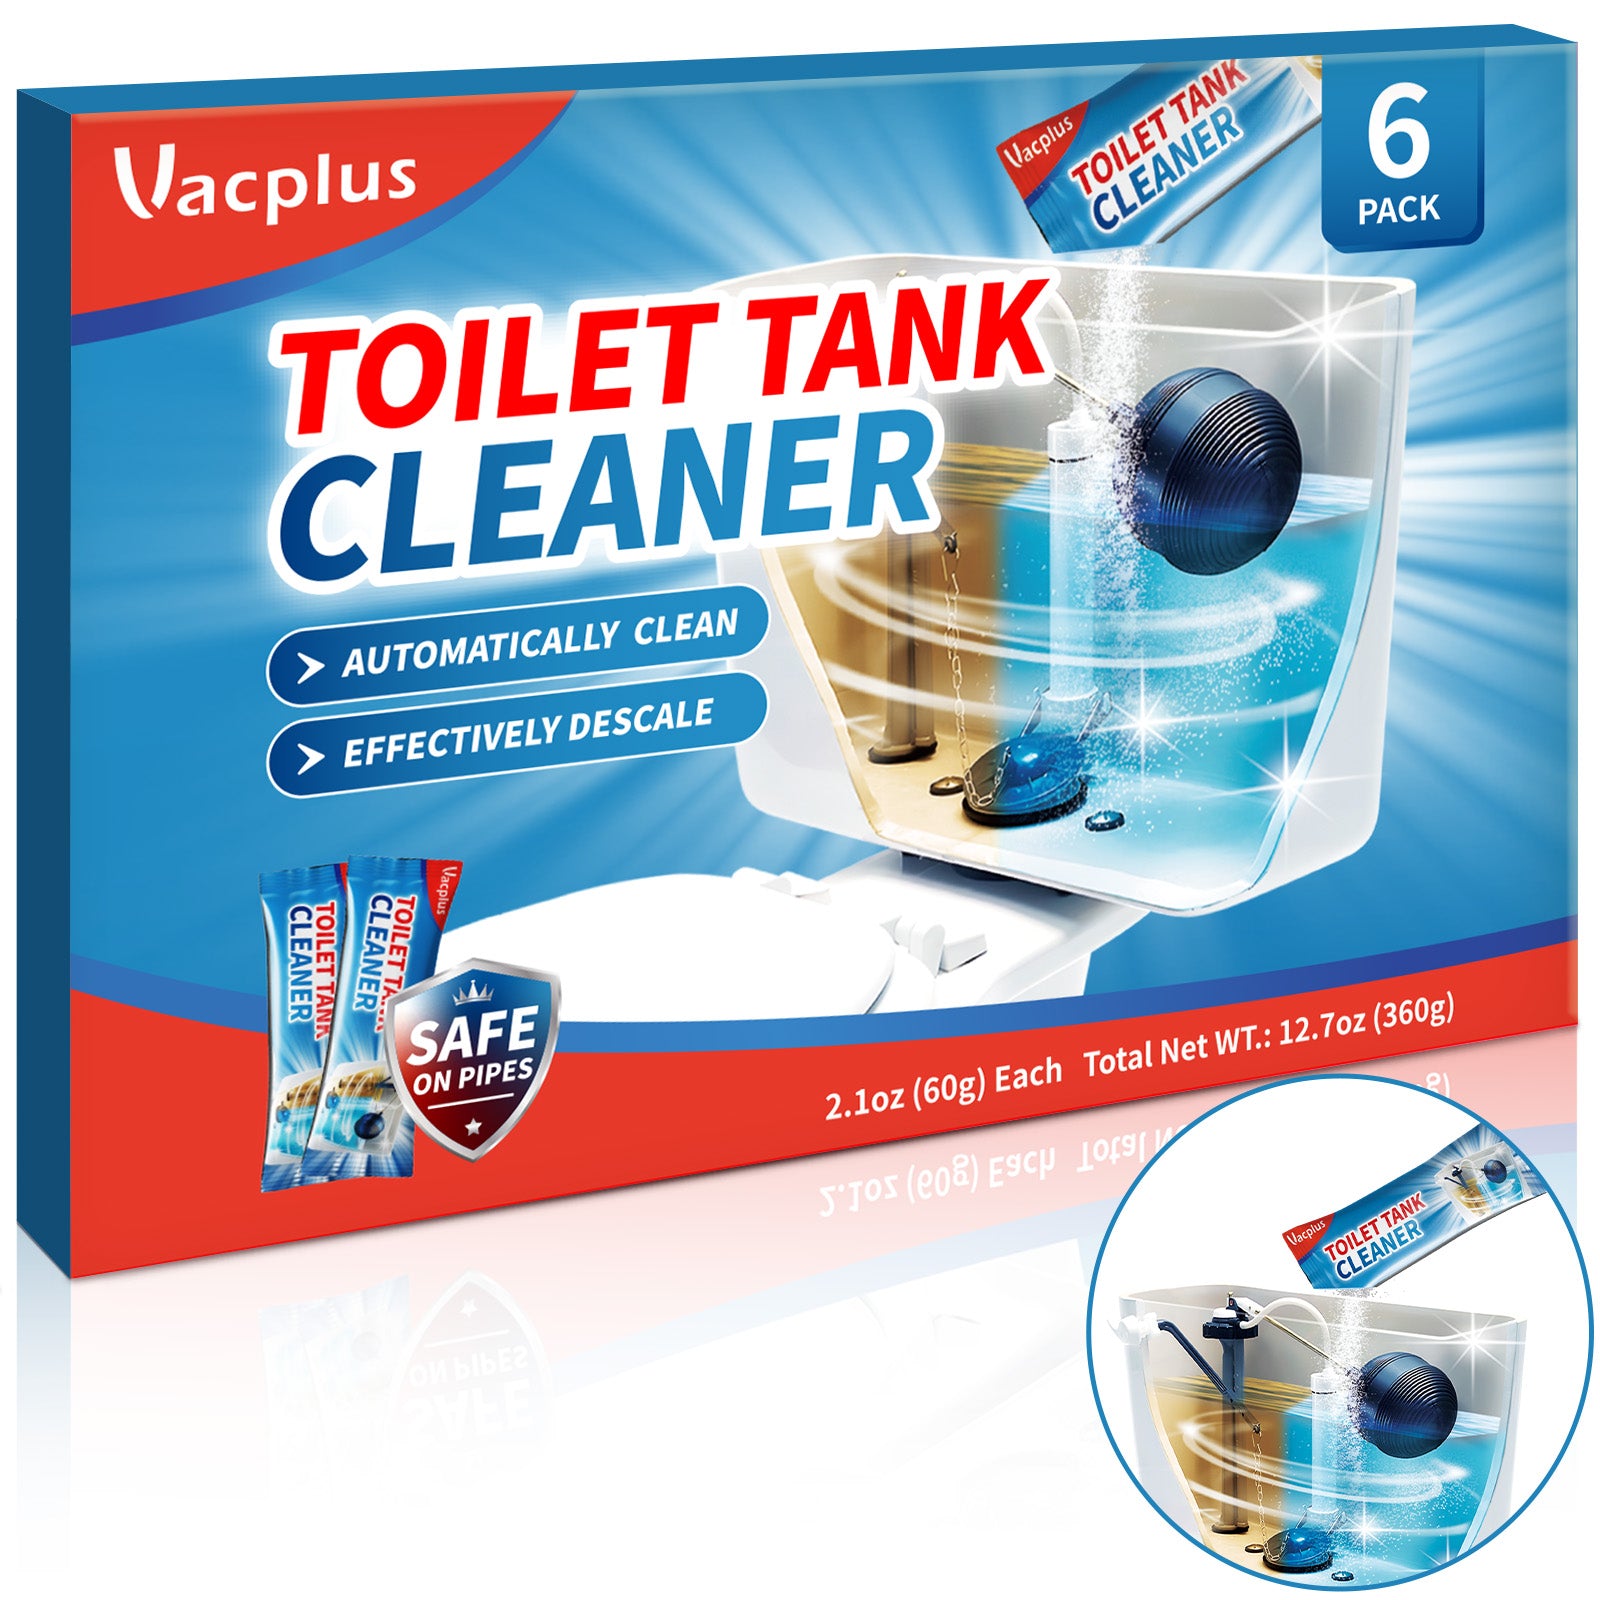 Vacplus Toilet Tank Cleaner - 6 Pack, Powerful Automatic Toilet Descaler without Scrubbing, Premeasured Toilet Mold Remover with Individual Wraps, Remove Rust and Other Minerals